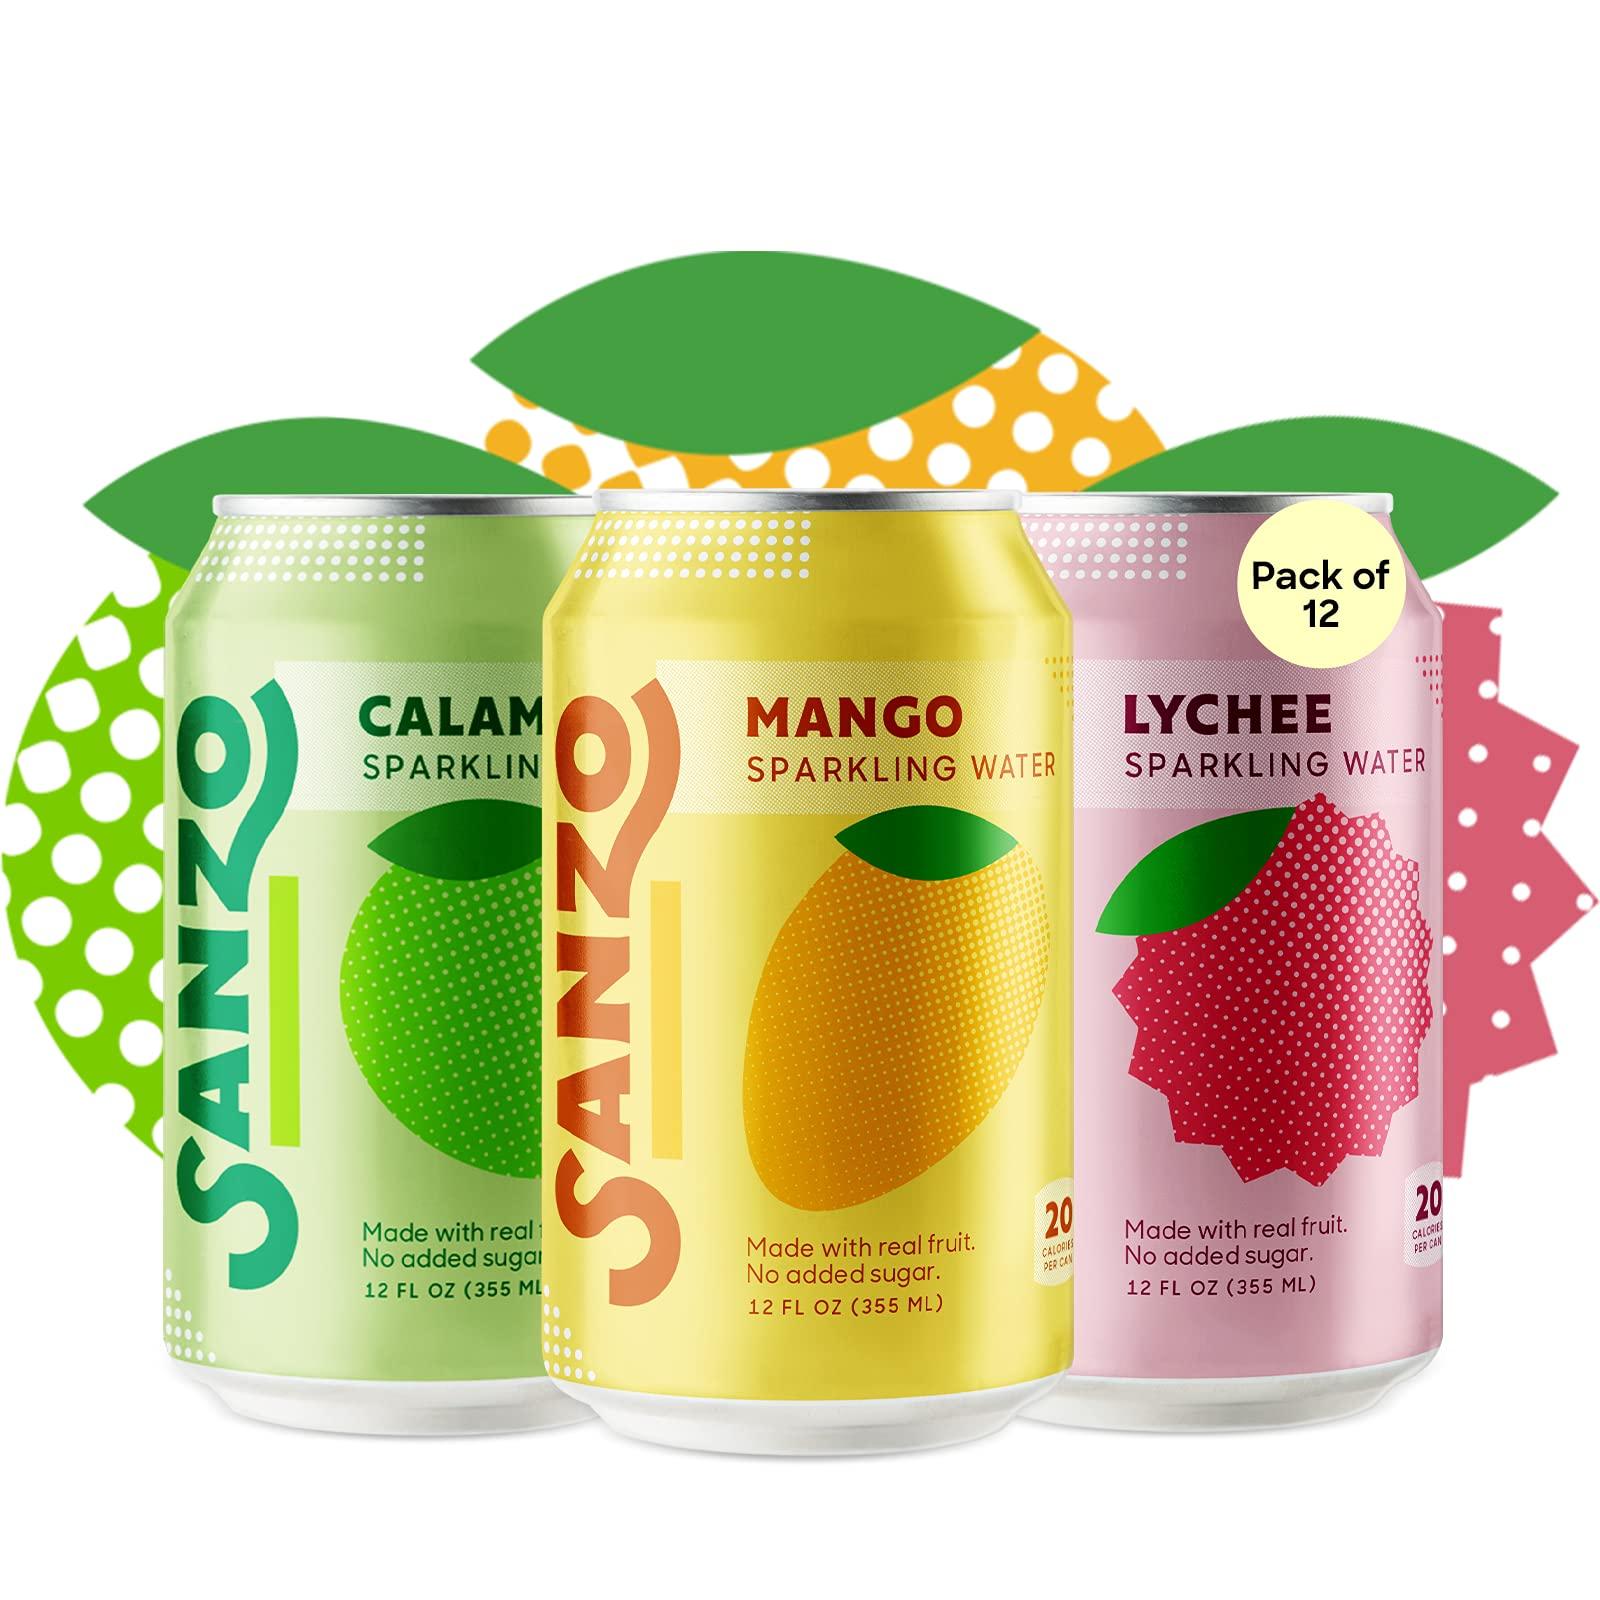 Sanzo Sparkling Water for Free After Rebate